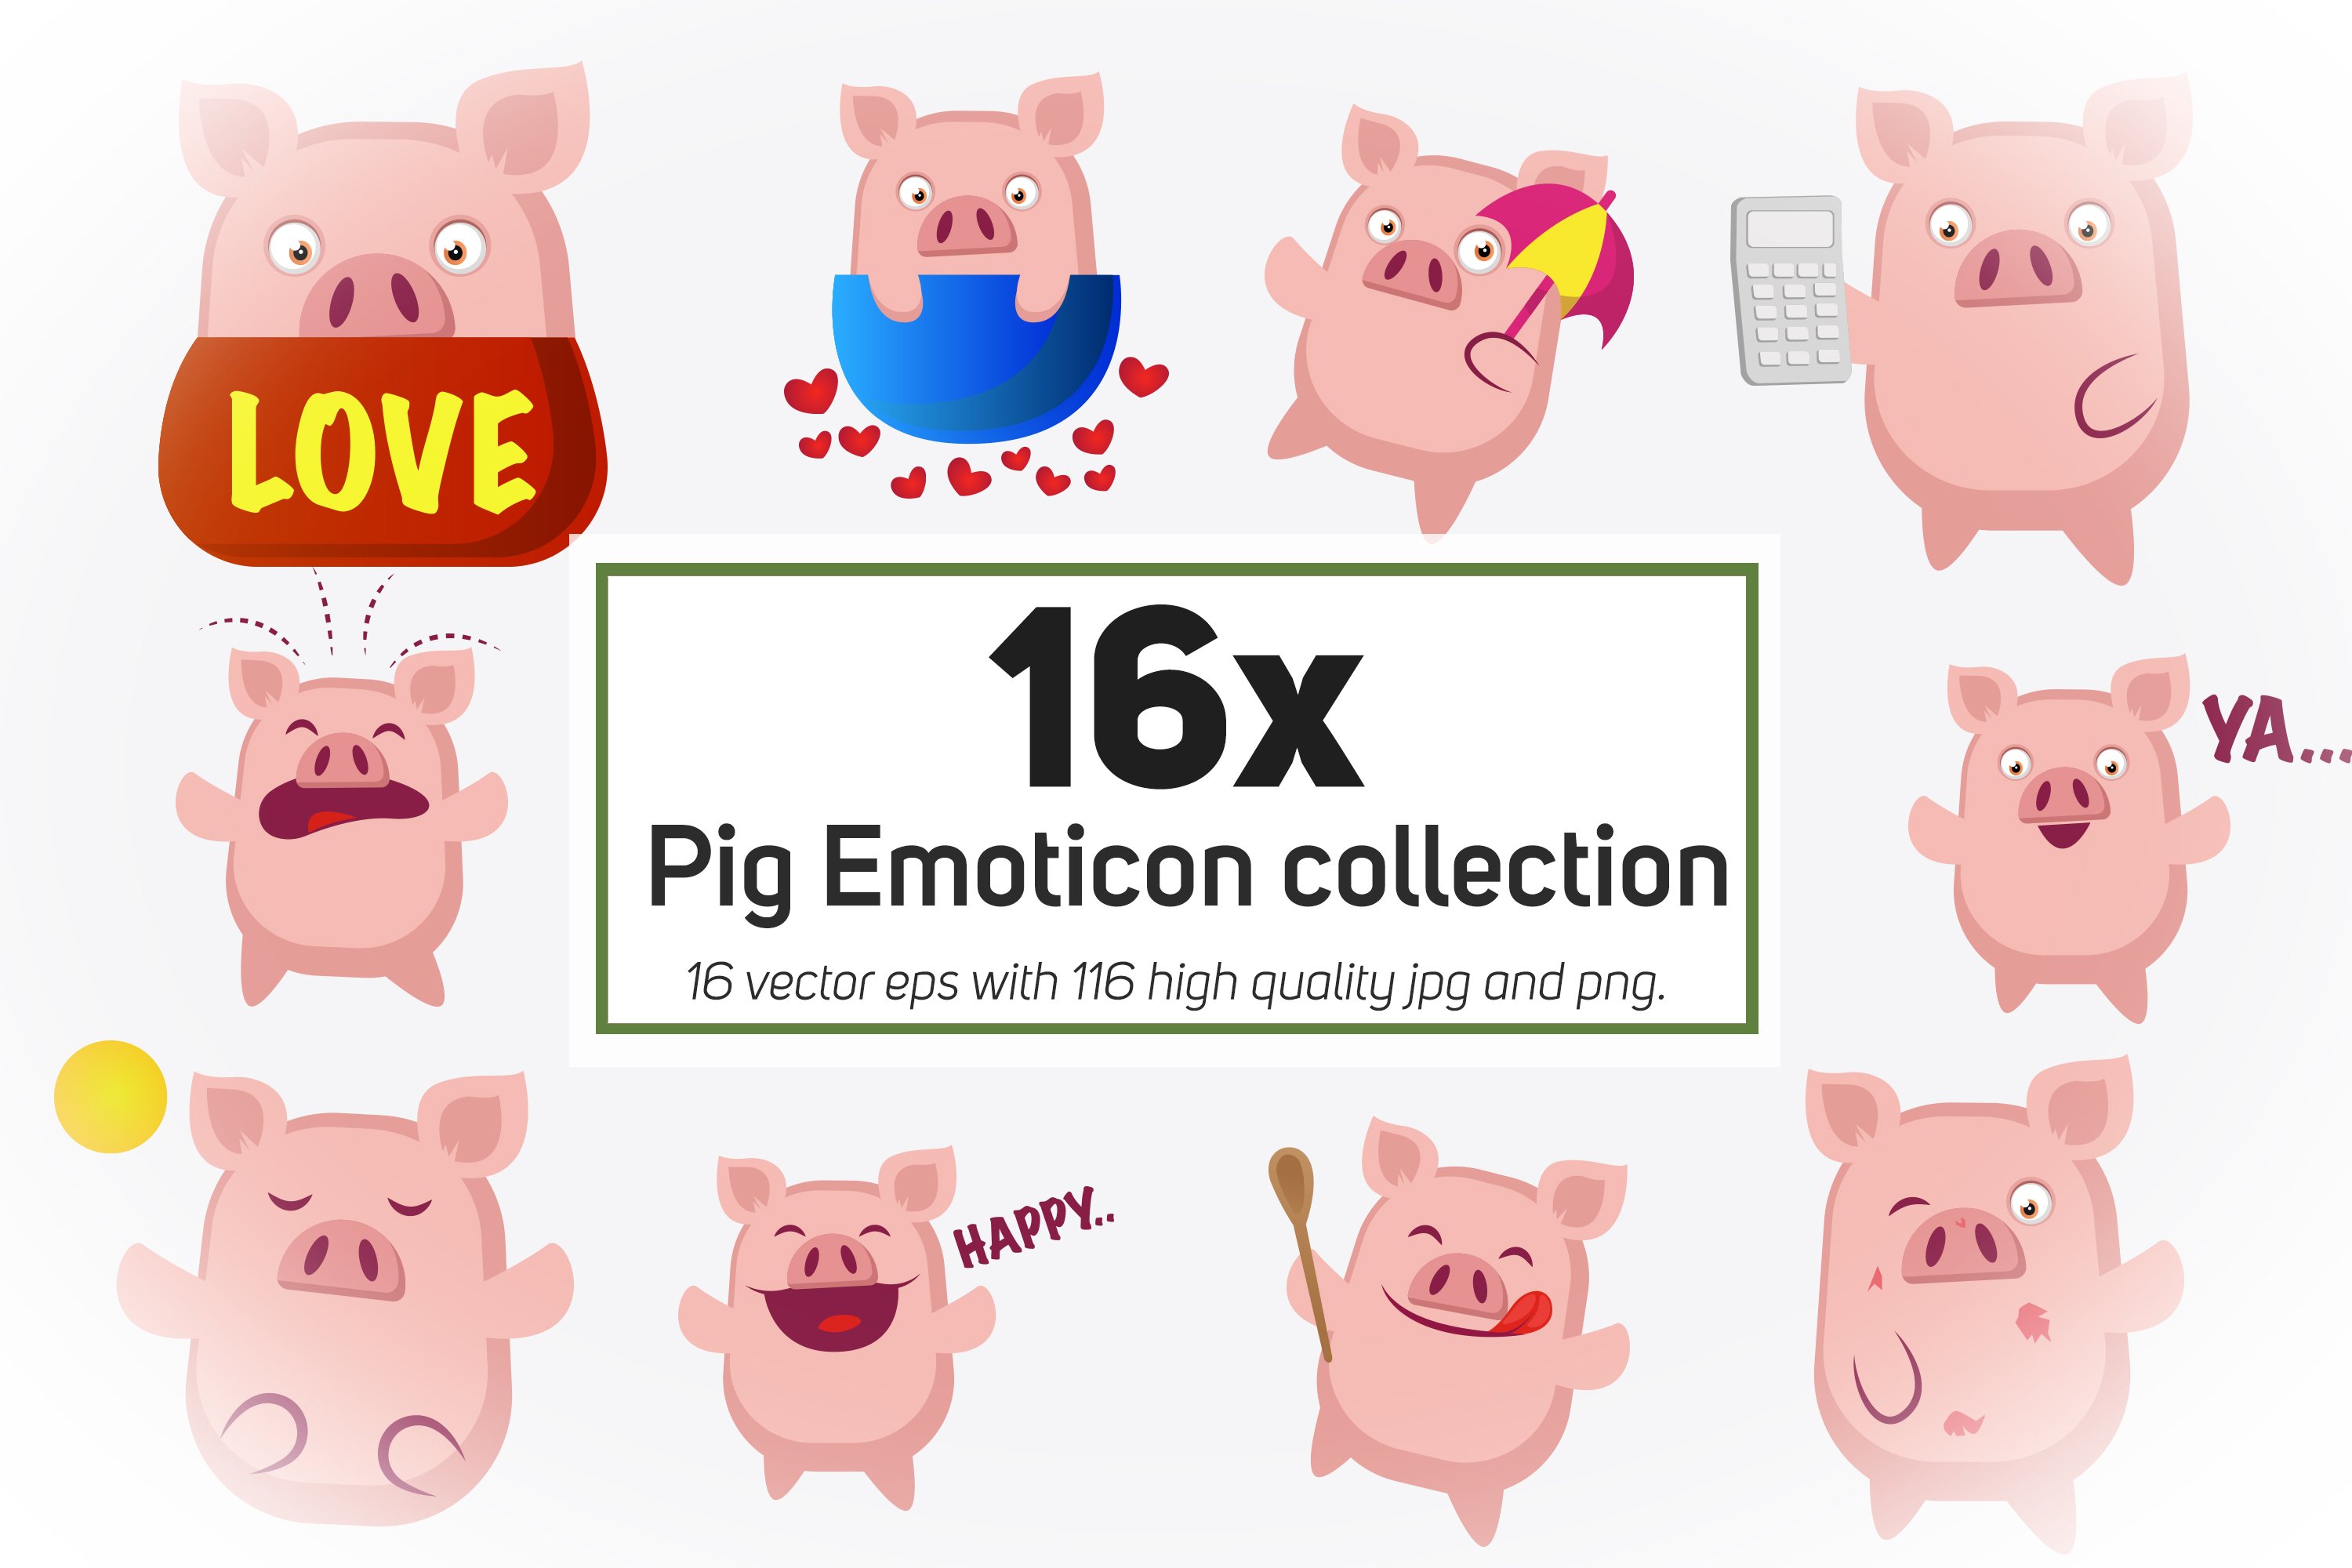 Cover with funny images of pigs emoticons.